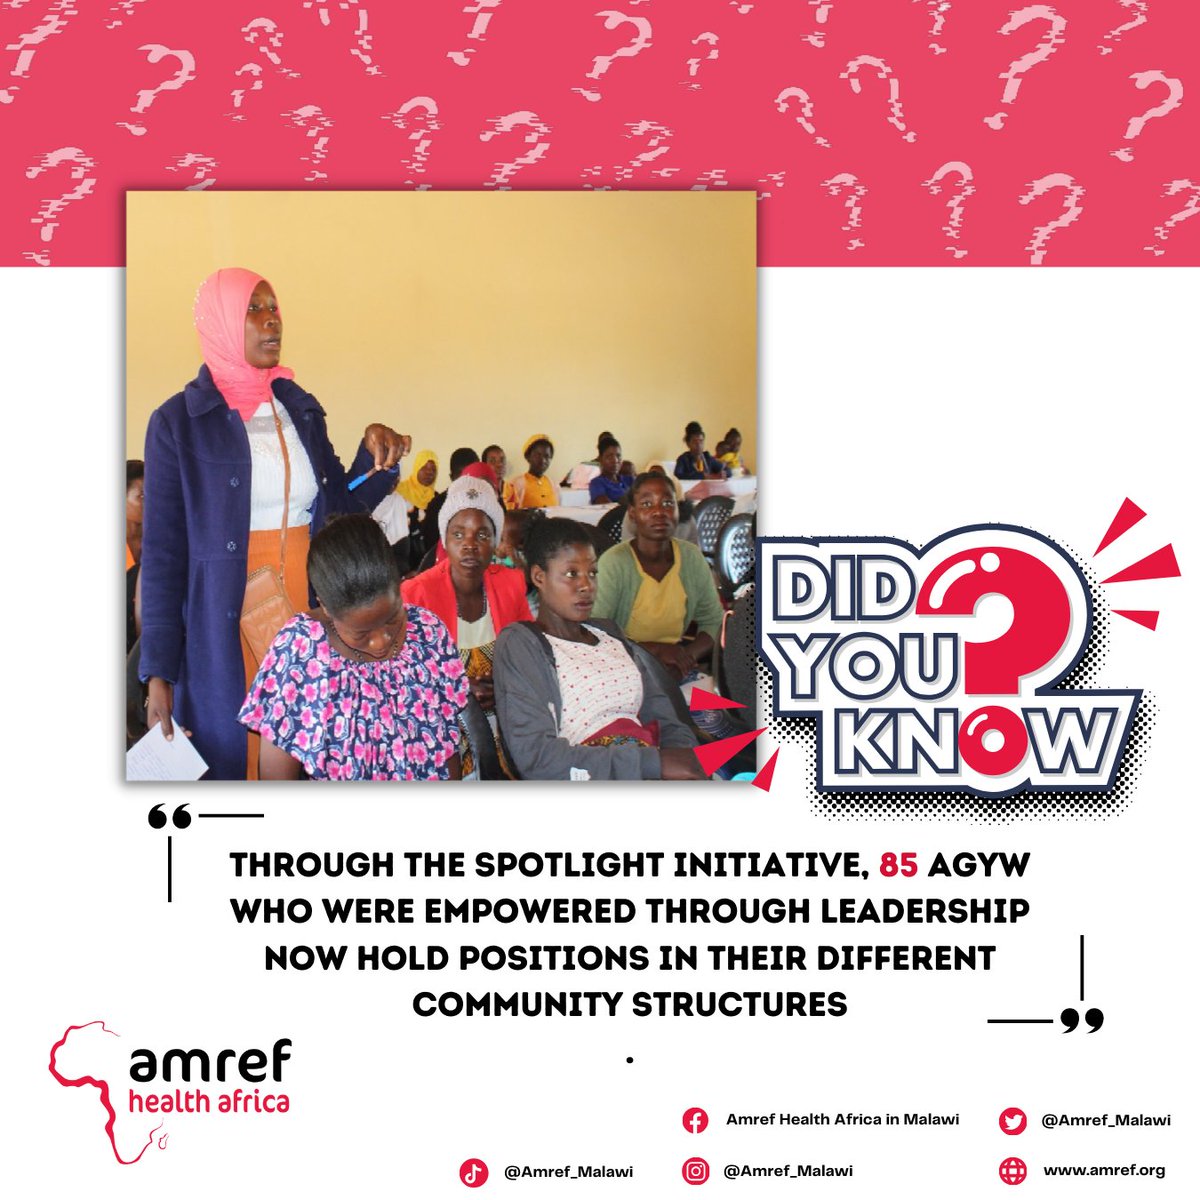 TIPS TUESDAY‼️ ‼️

Did you know that through the Amref led Spotlight Initiative; 83 Adolescents, Girls & Young Women who were empowered through Leadership trainings now hold positions in their different community structures. 

#TipsTuesday #DYK #didyouknow #amrefmw #Amref #Malawi